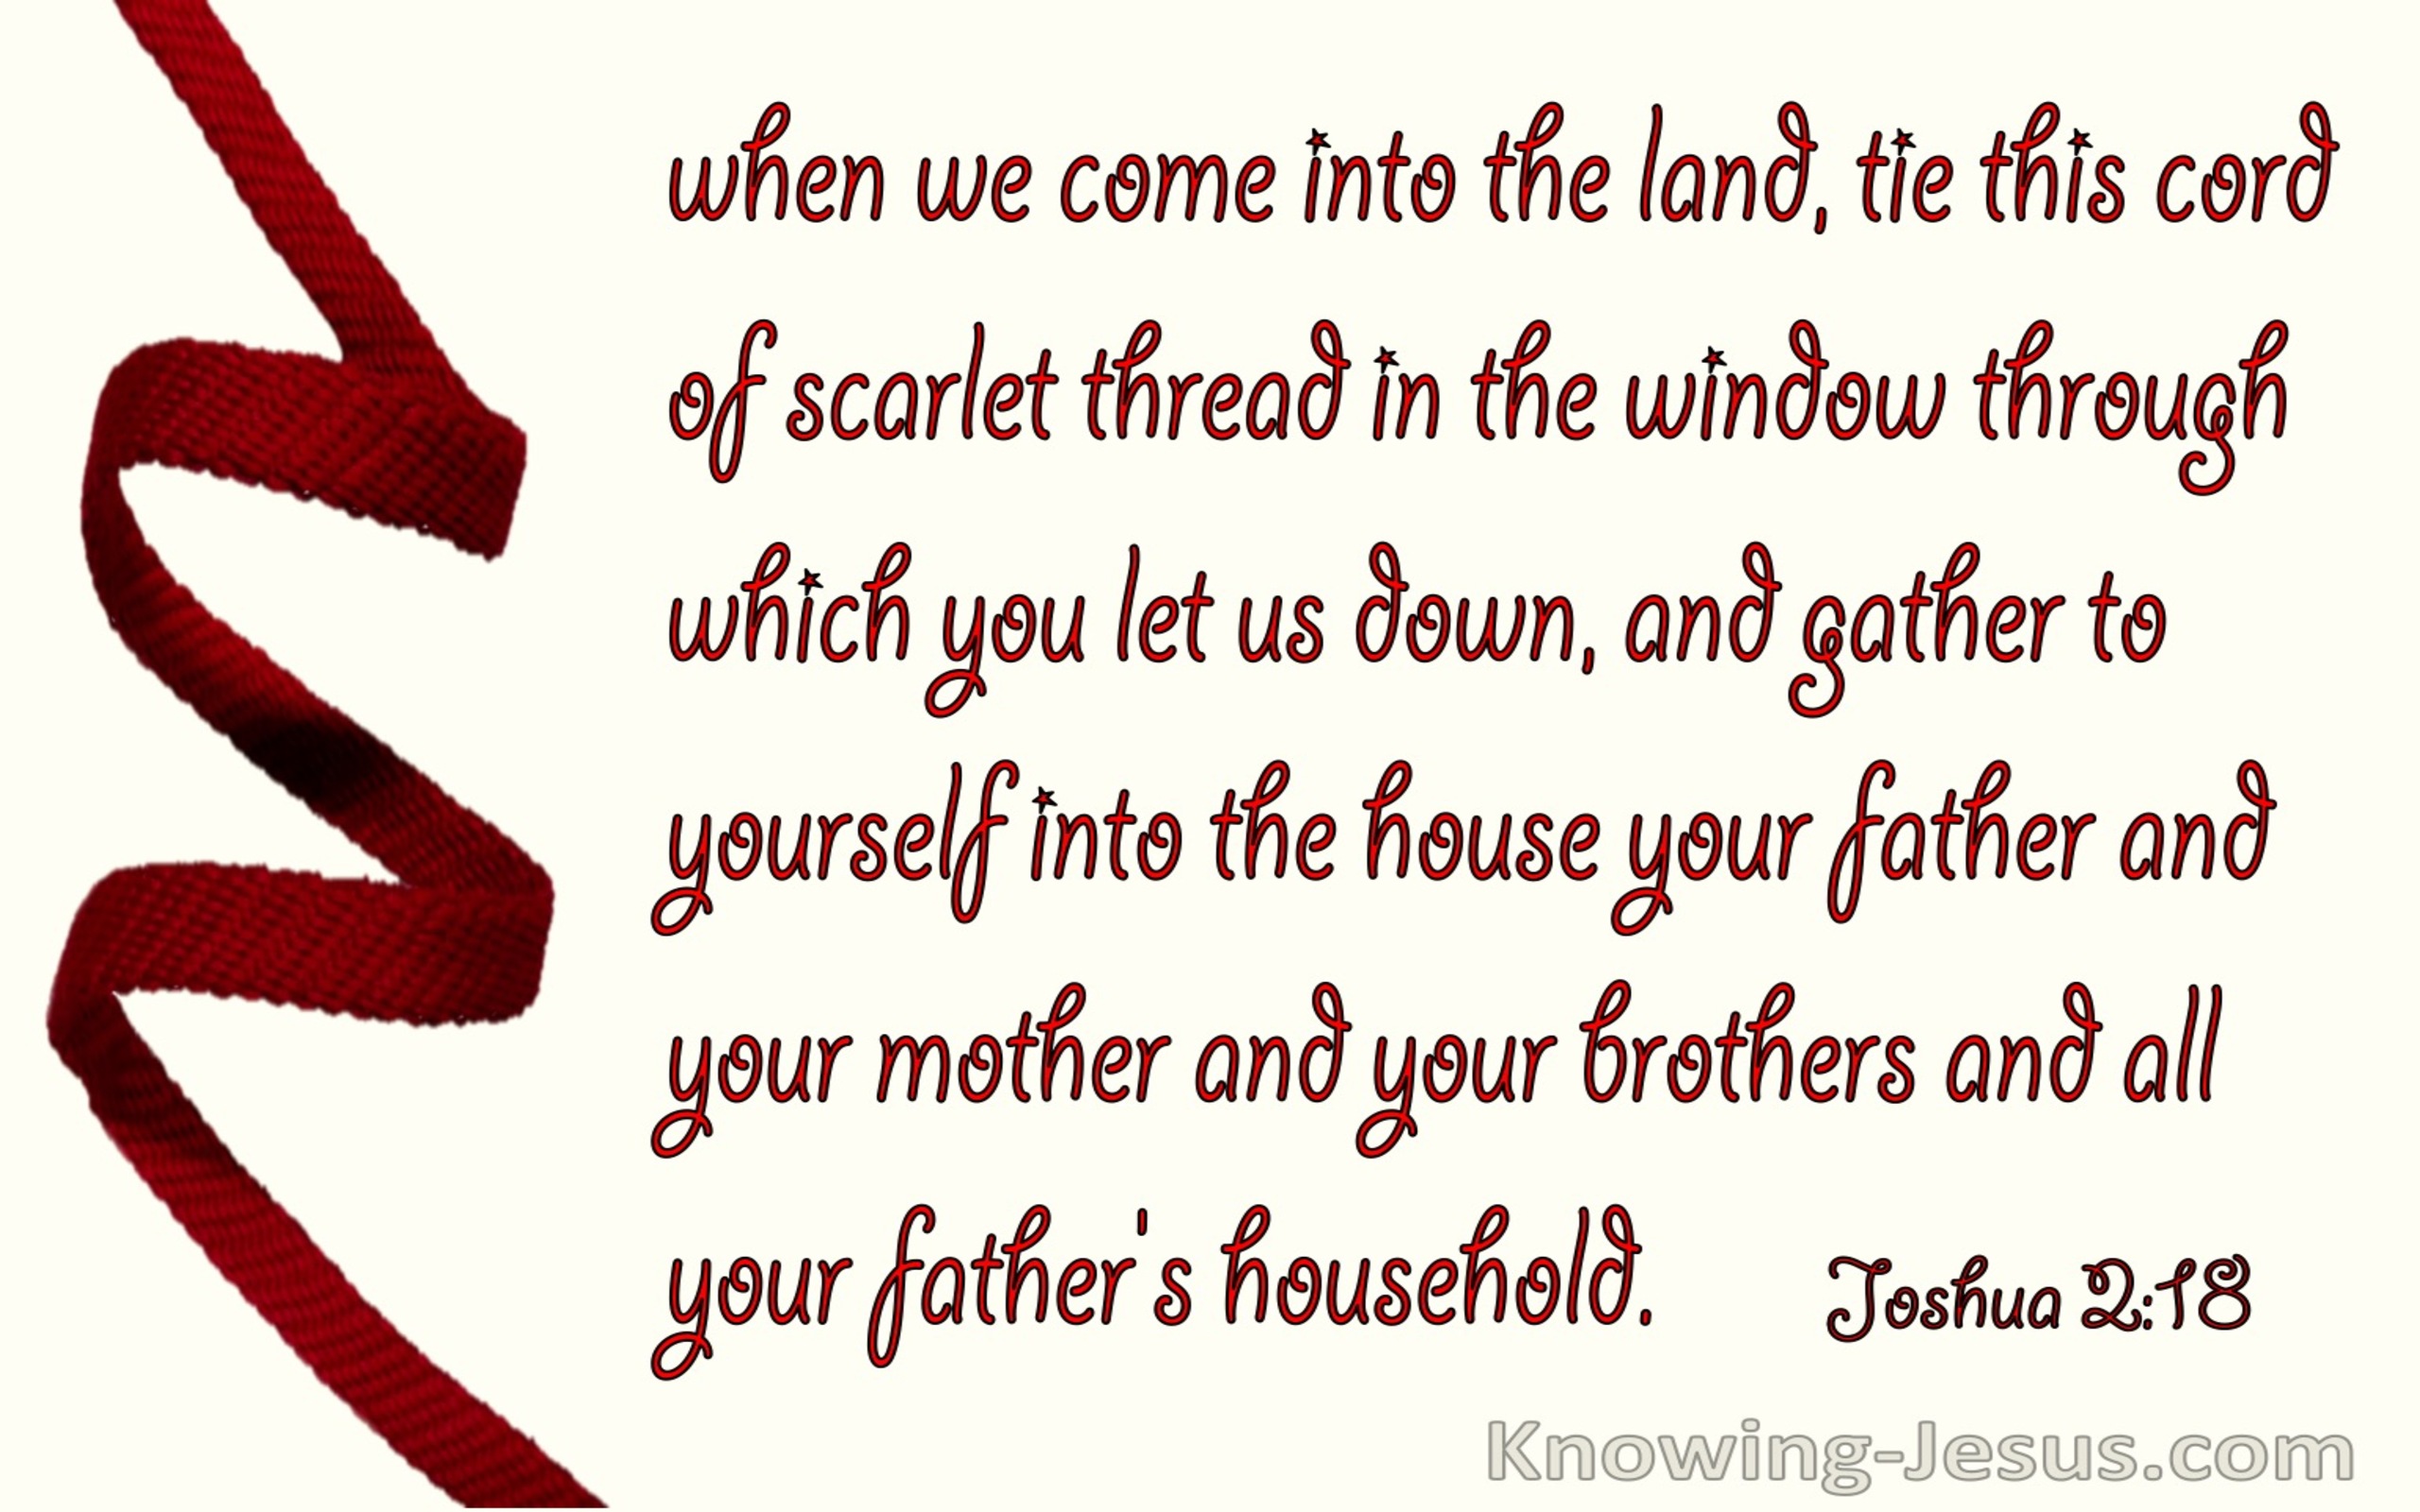 Joshua 2:18 Tie The Cord Of Scarlet In The Window (red)